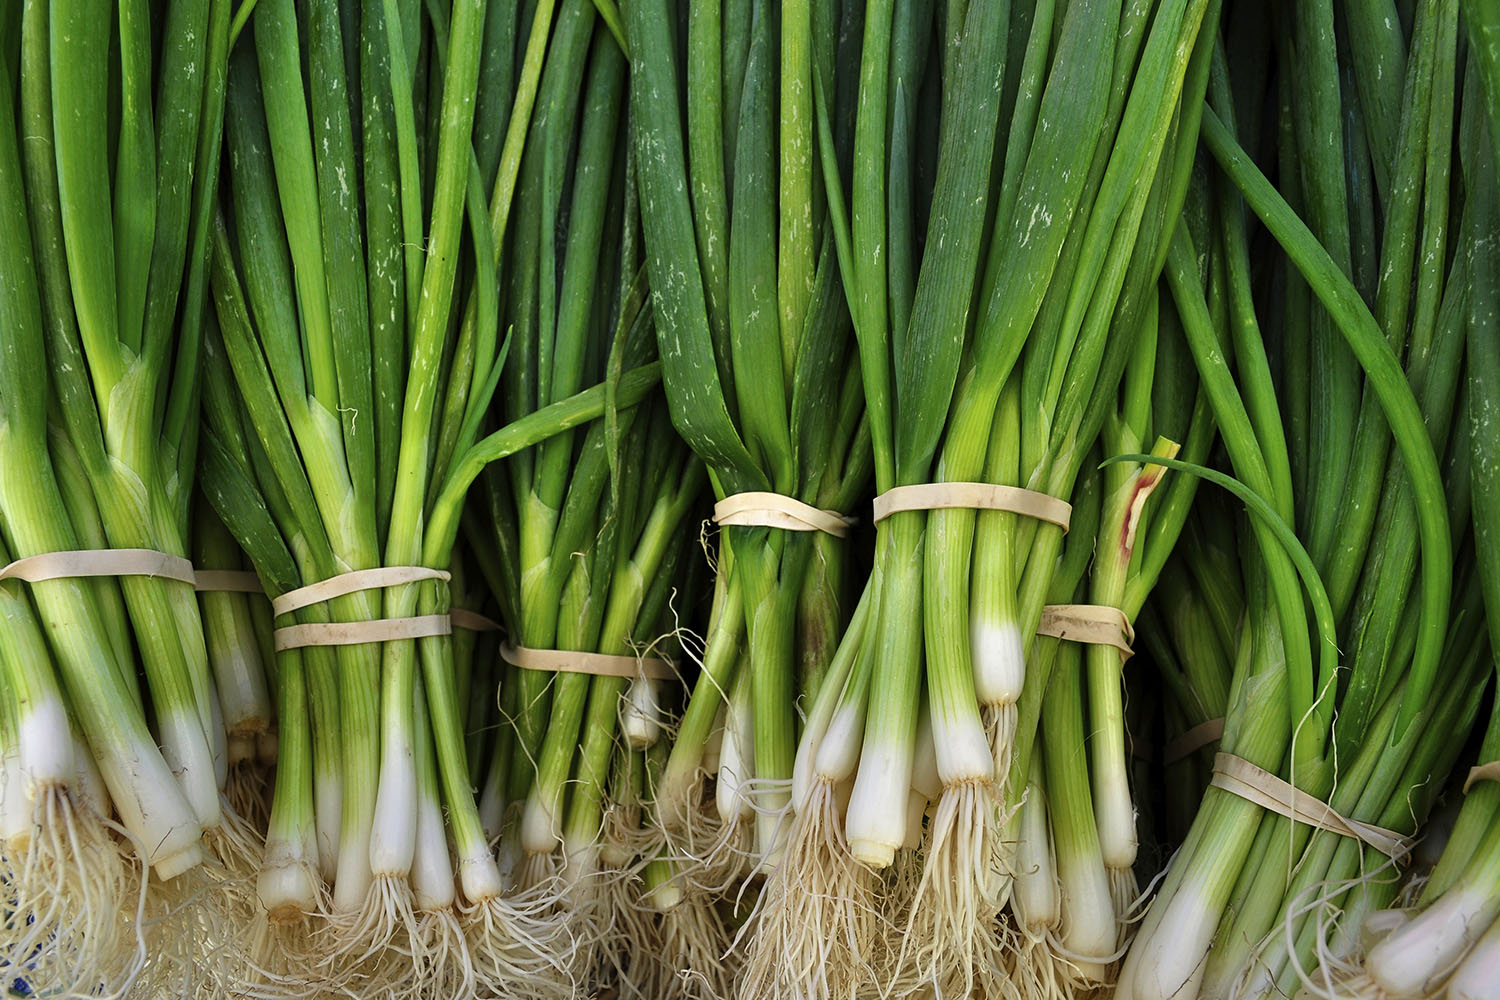 Shallots Vs Spring Onion: Are They The Same Thing?